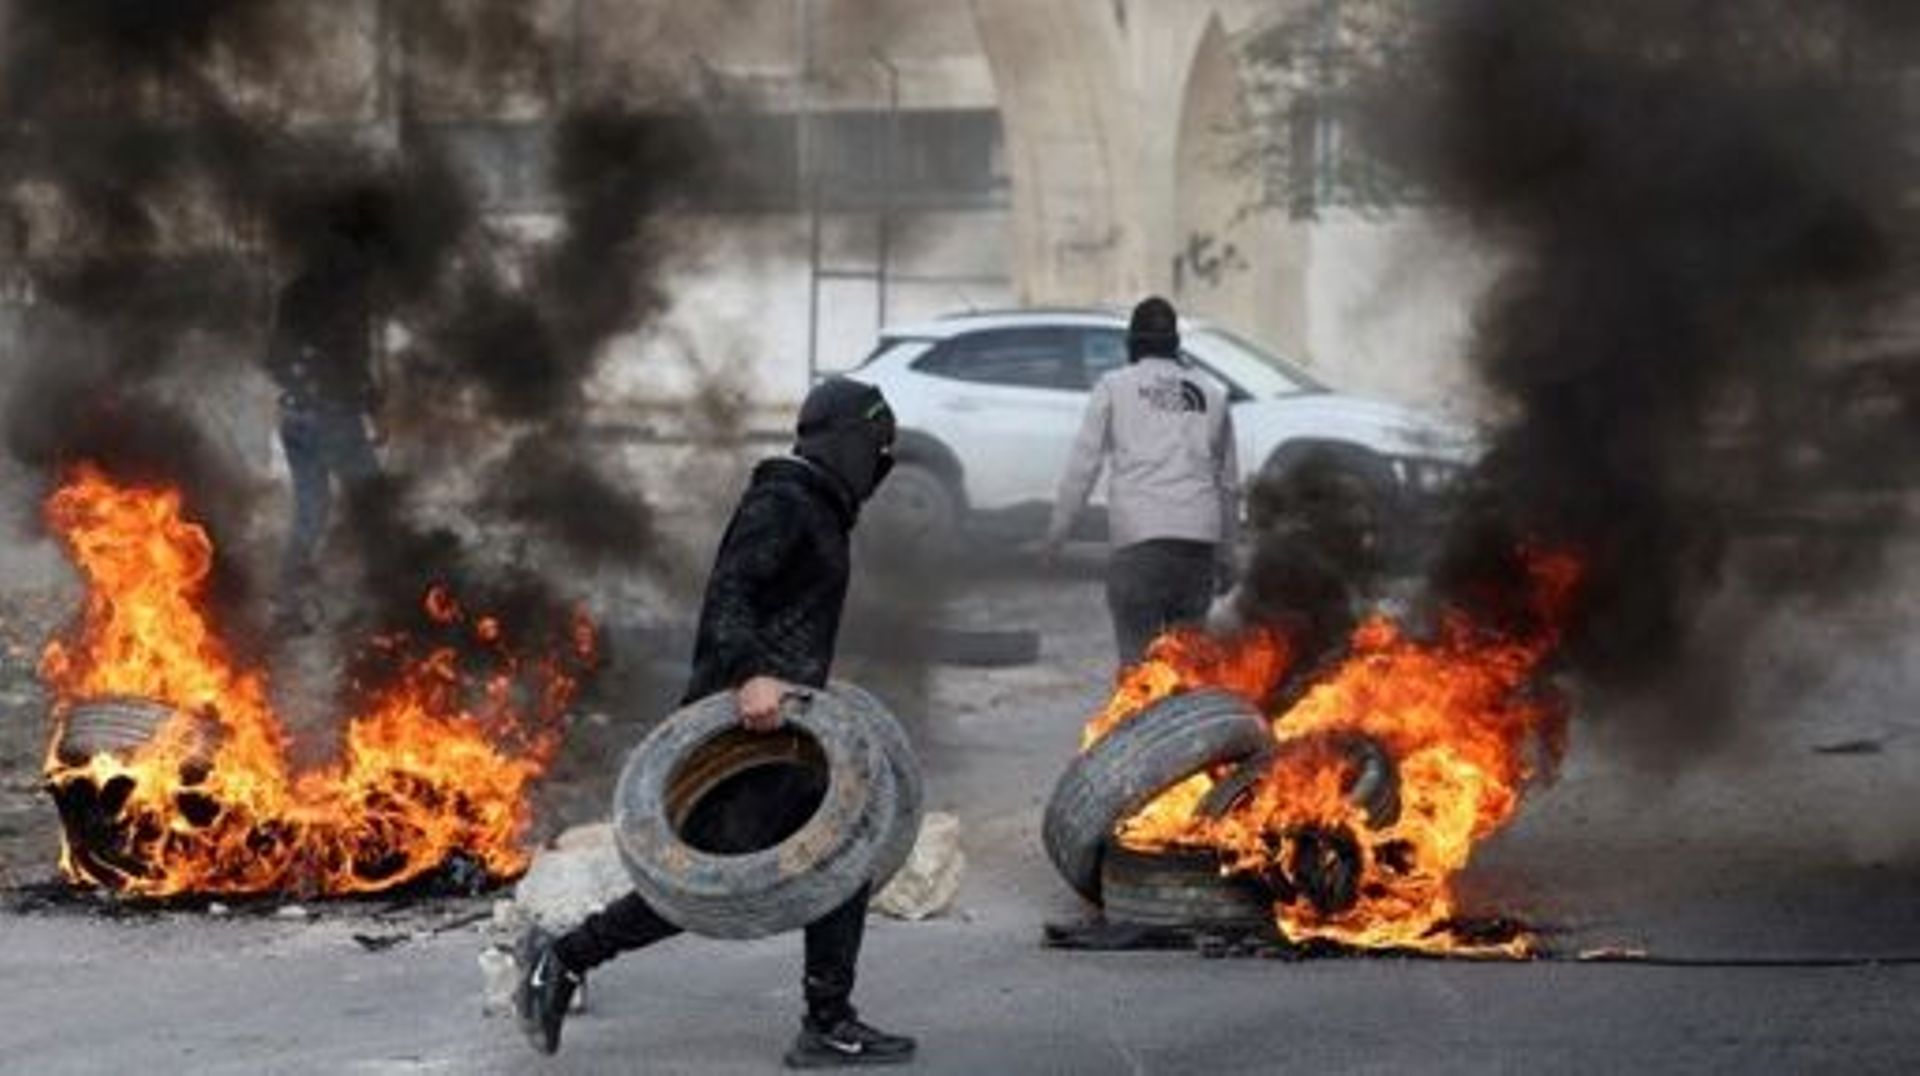 Palestinian protesters burn tyres to block a road leading into Jericho in the occupied West Bank, on February 6, 2023, following a raid in town by Israeli forces. Israeli forces on February 6 killed five alleged Palestinian gunmen in a raid in the occupie